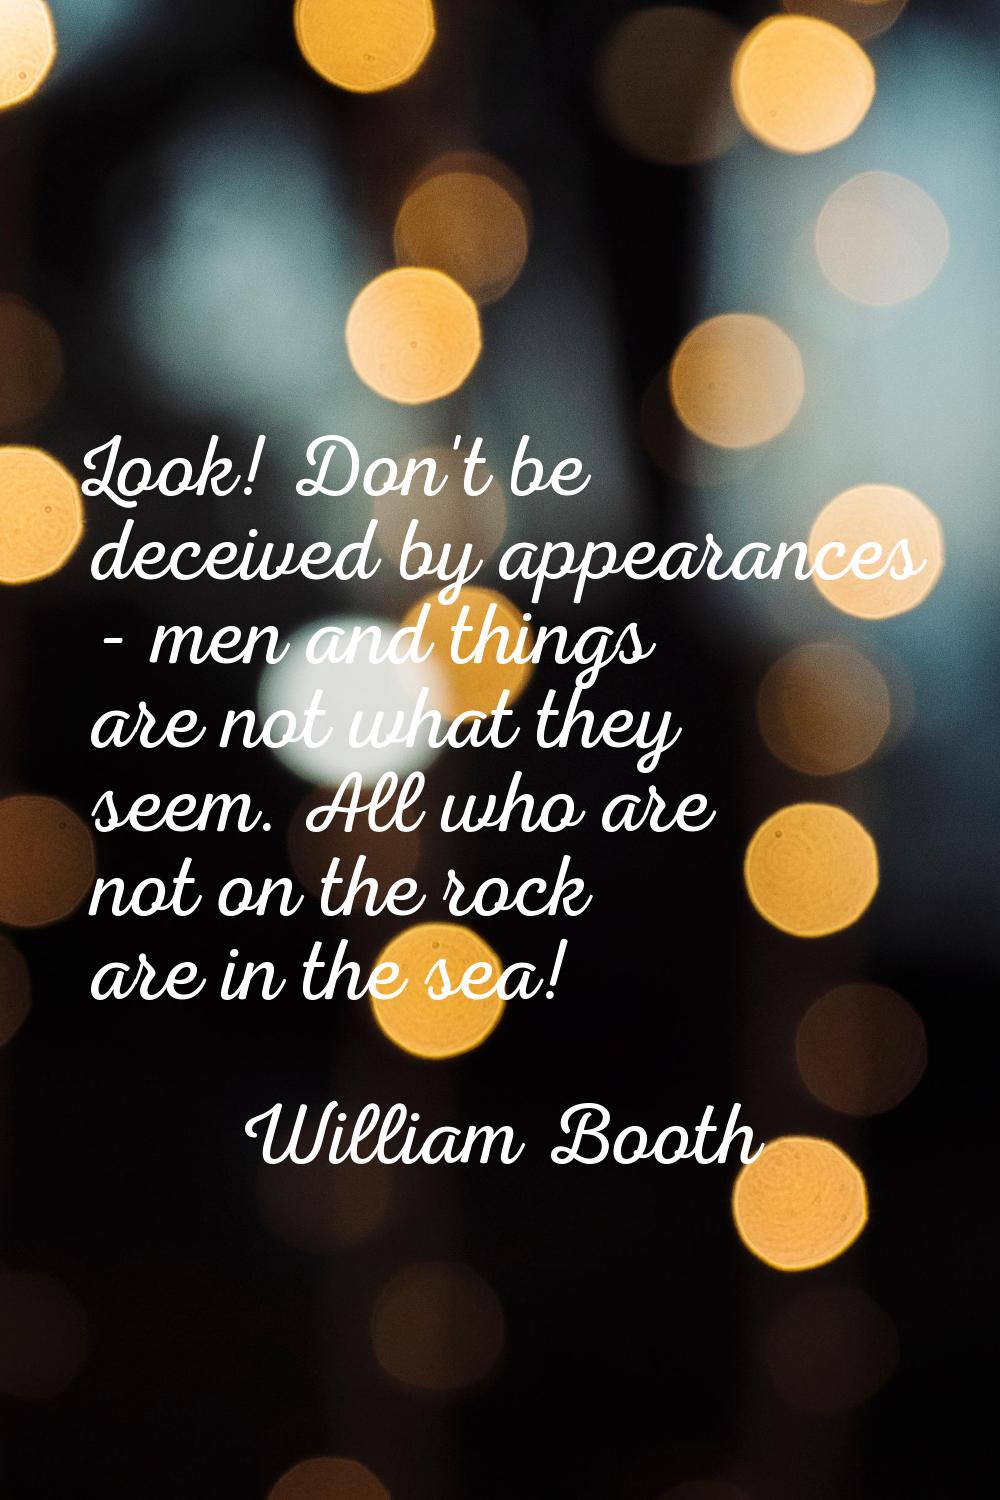 Look! Don't be deceived by appearances - men and things are not what they seem. All who are not on 